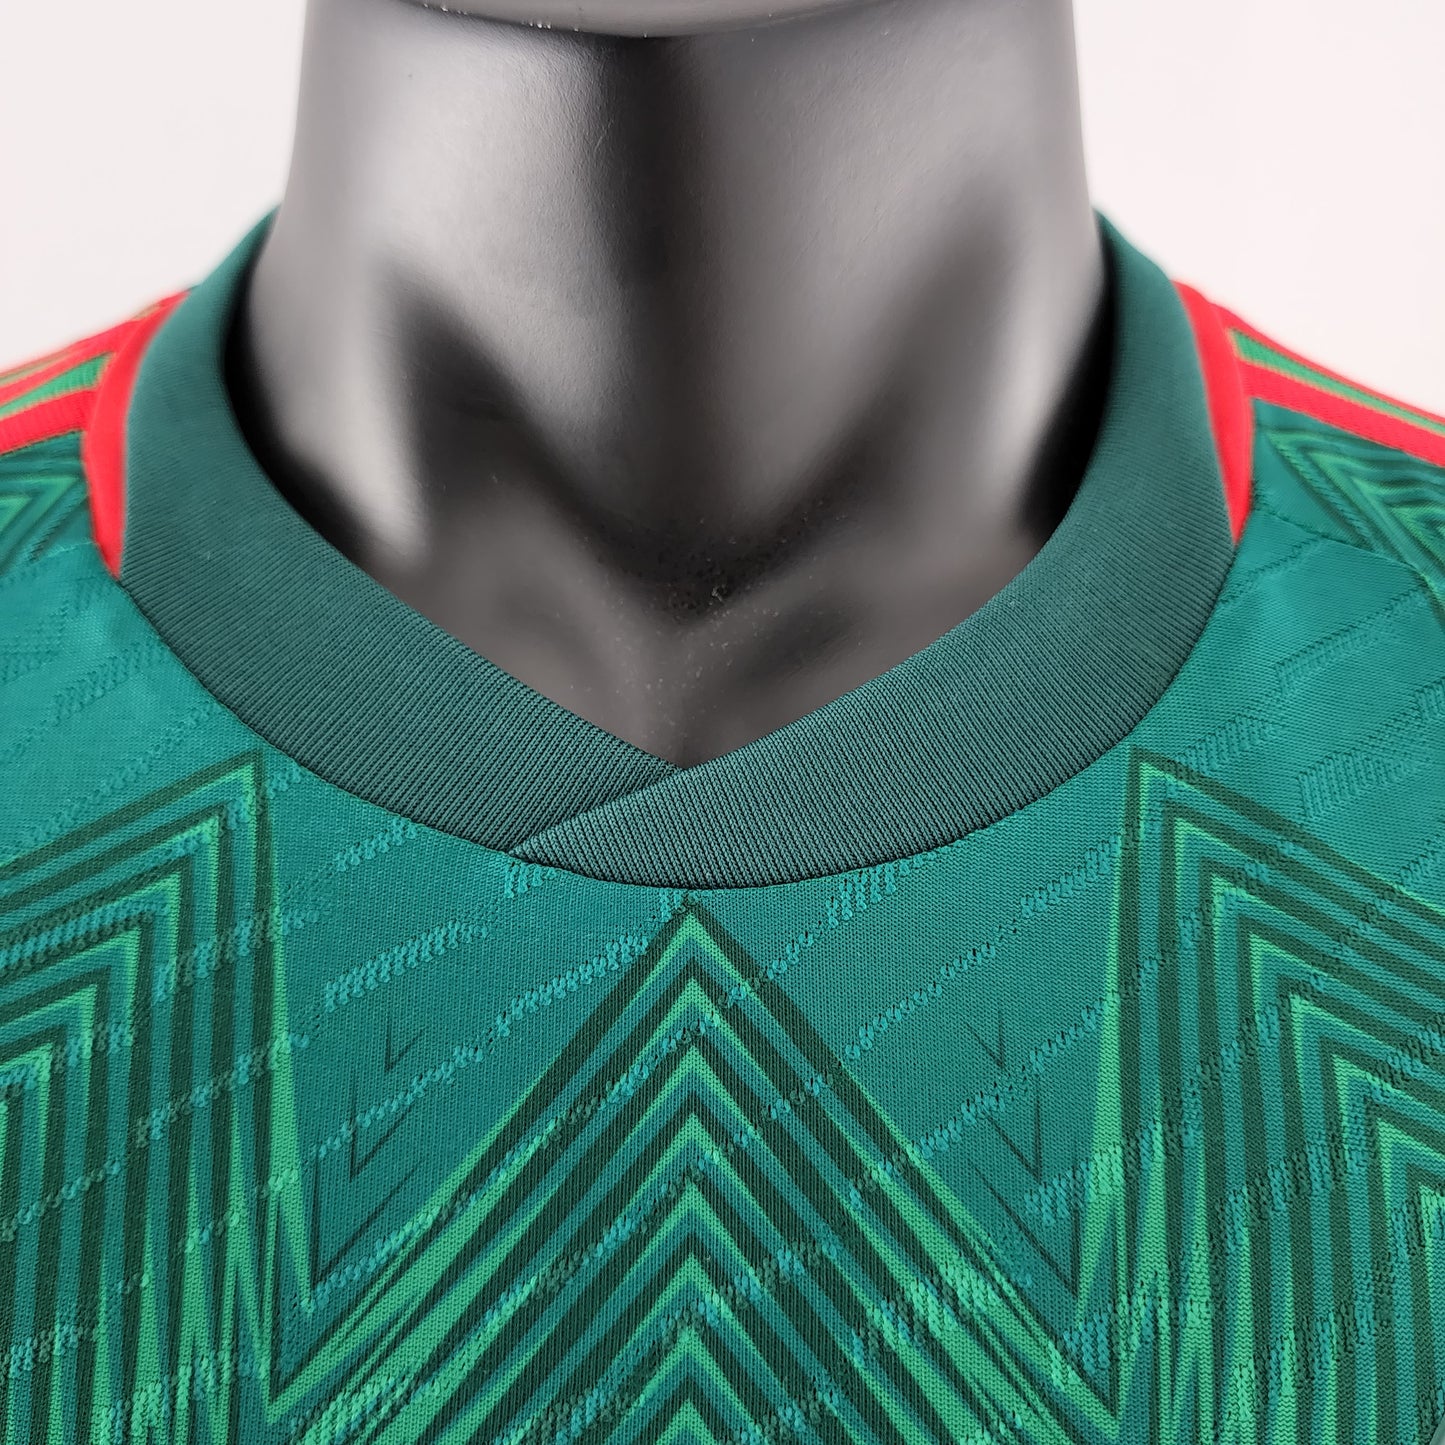 MEXICO 2022 HOME JERSEY